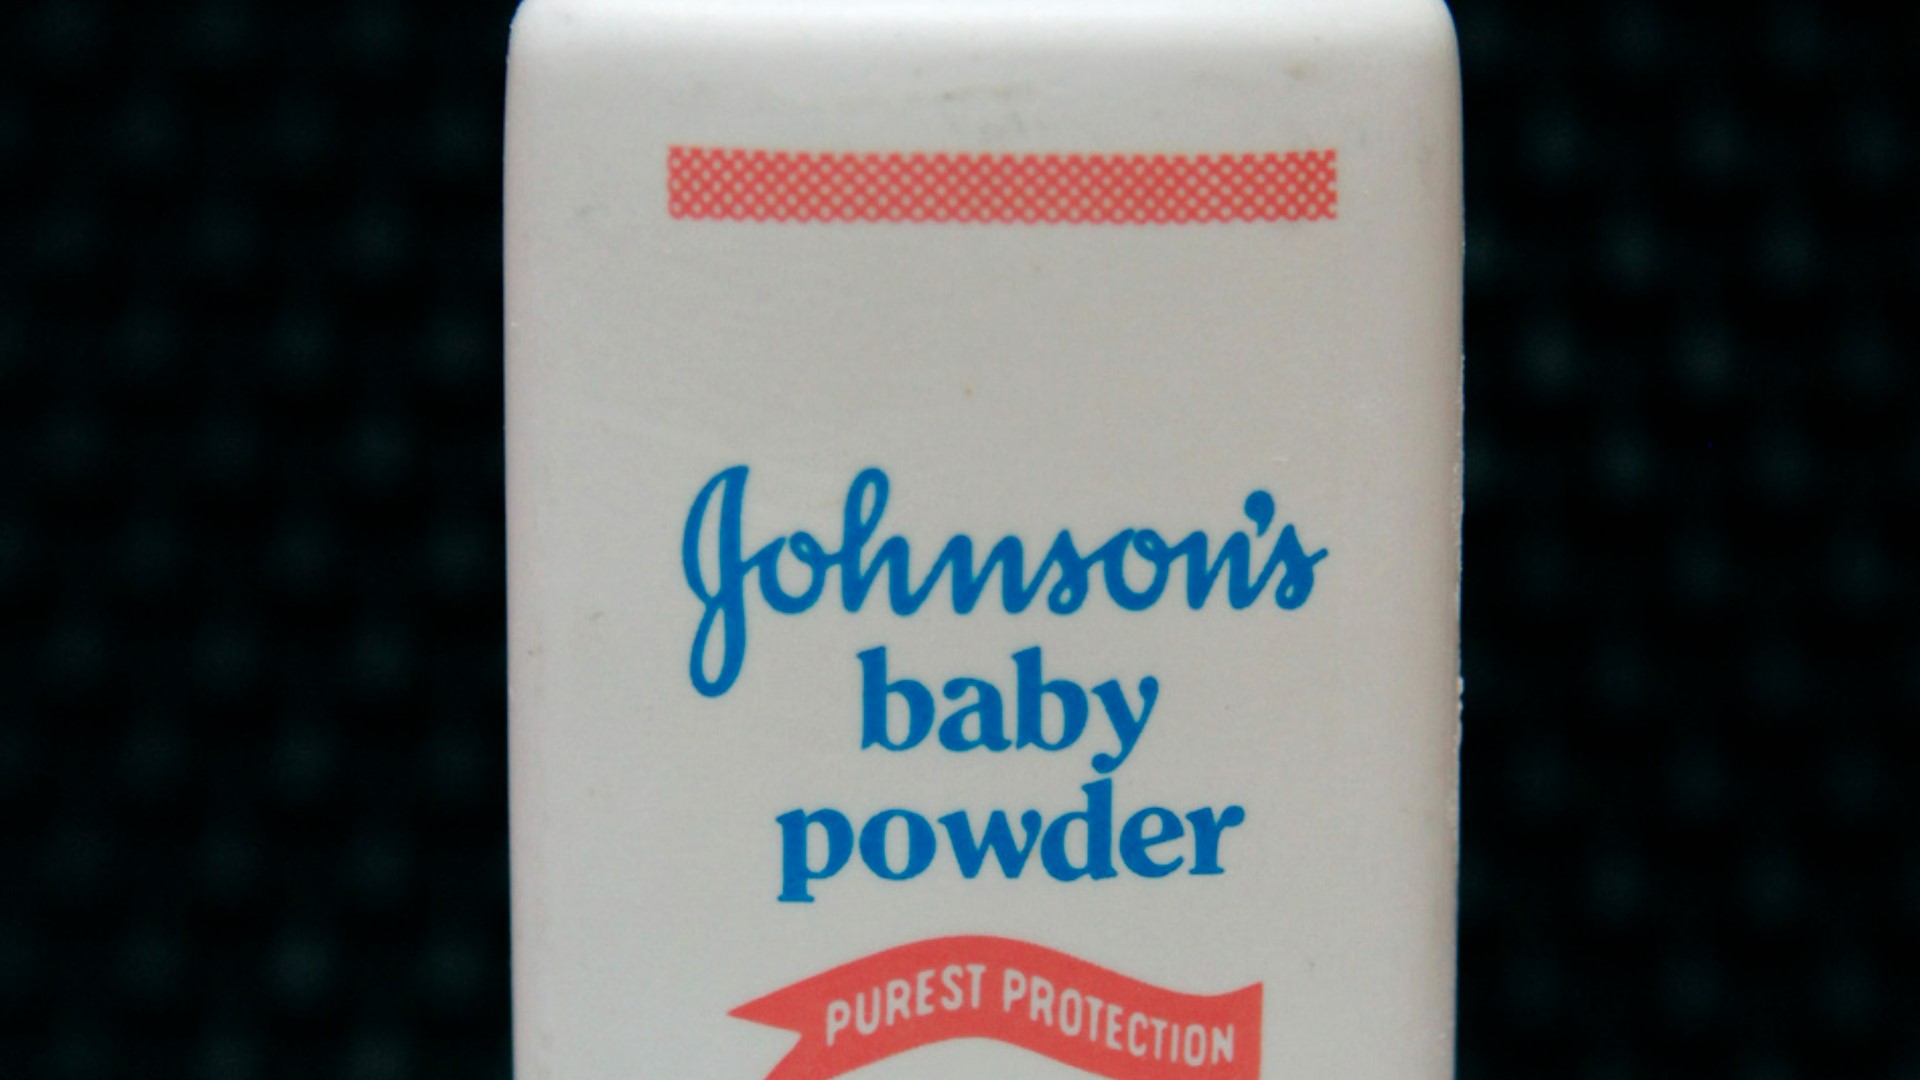 The lawsuits filed against Johnson & Johnson had alleged its baby powder containing talc caused users to develop ovarian cancer and mesothelioma.